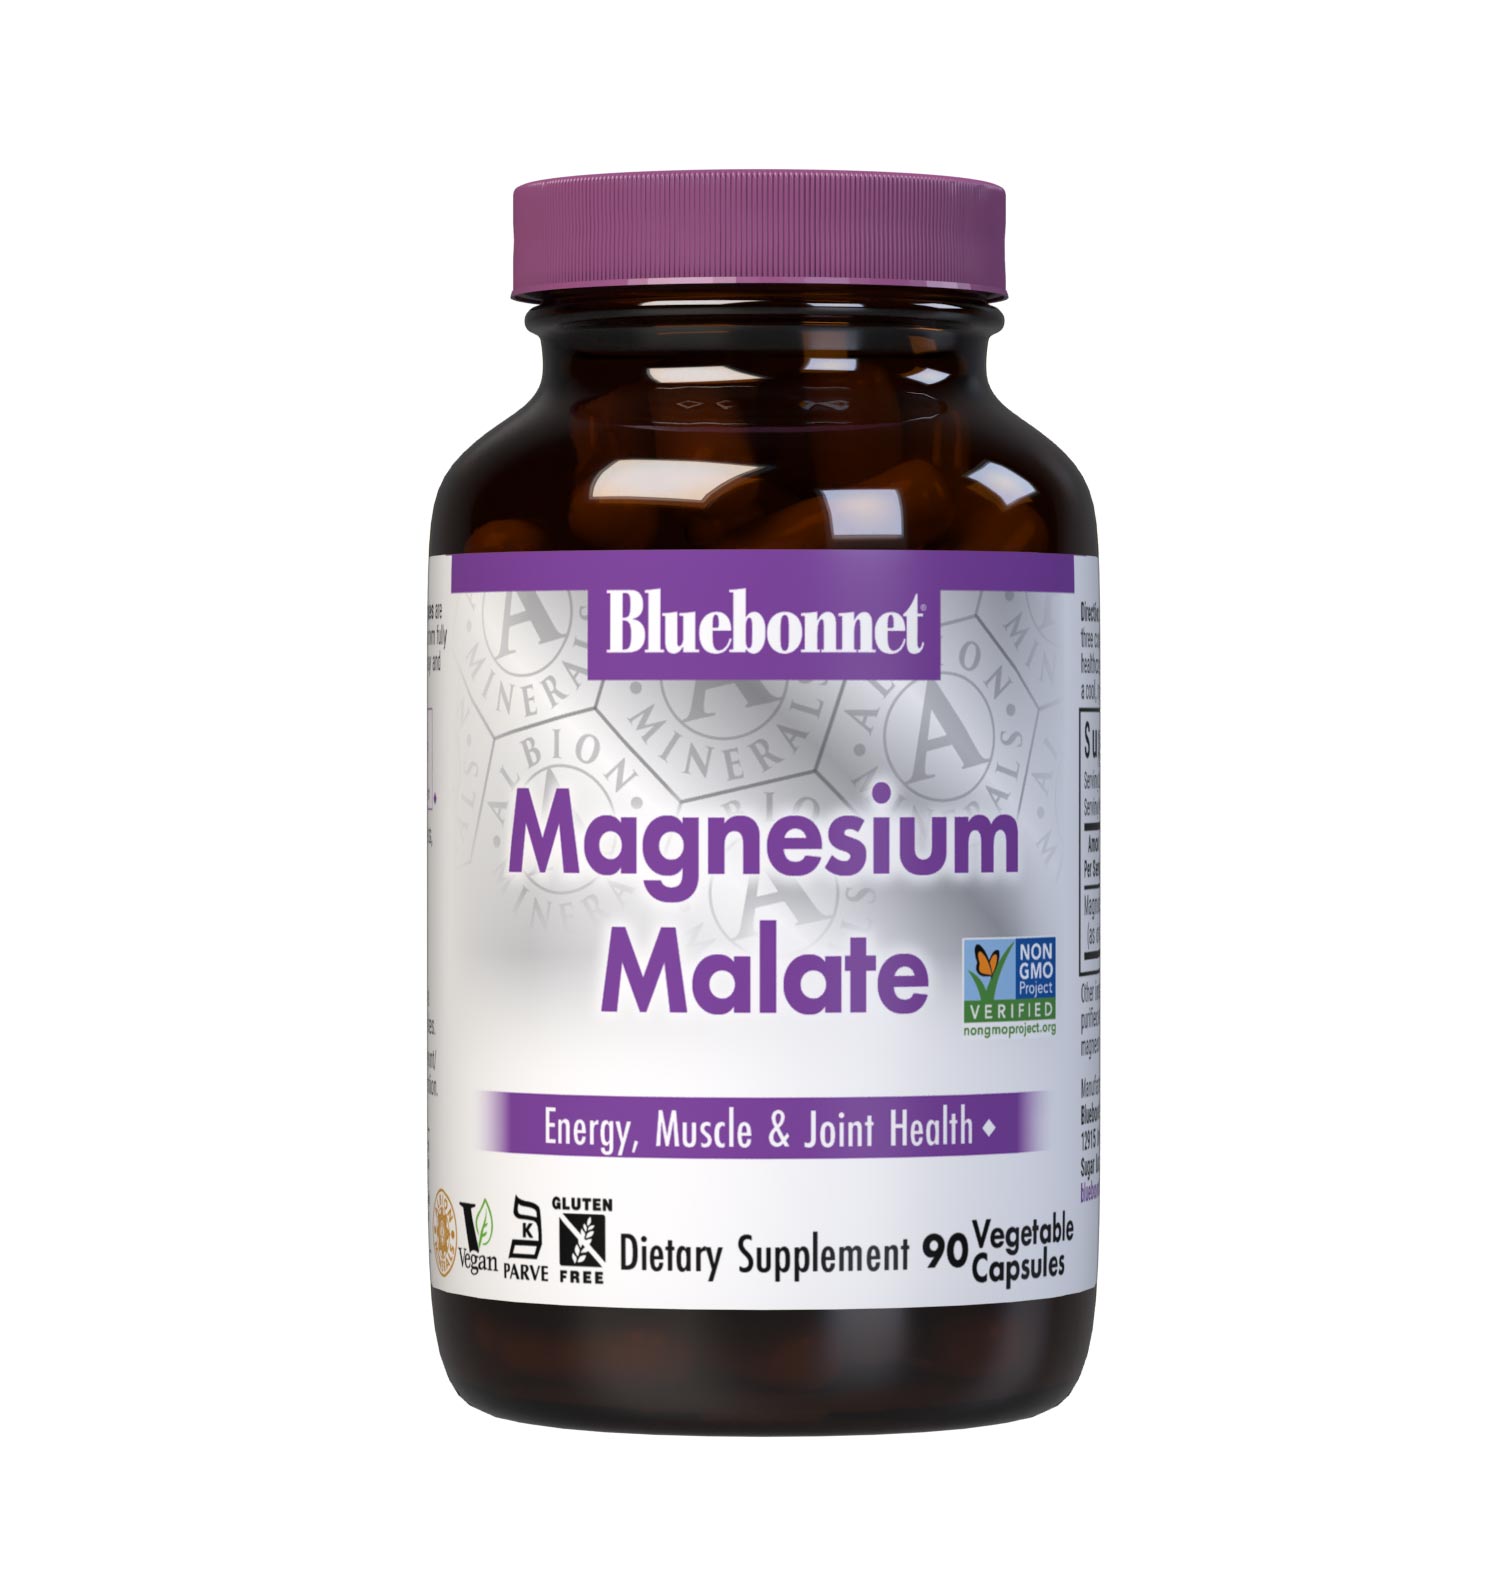 Bluebonnet's Magnesium Malate Vegetable capsules are formulated with 425 mg of elemental magnesium from fully reacted di-magnesium malate from Albion for energy and vitality, as well as muscle and joint health. #size_90 count